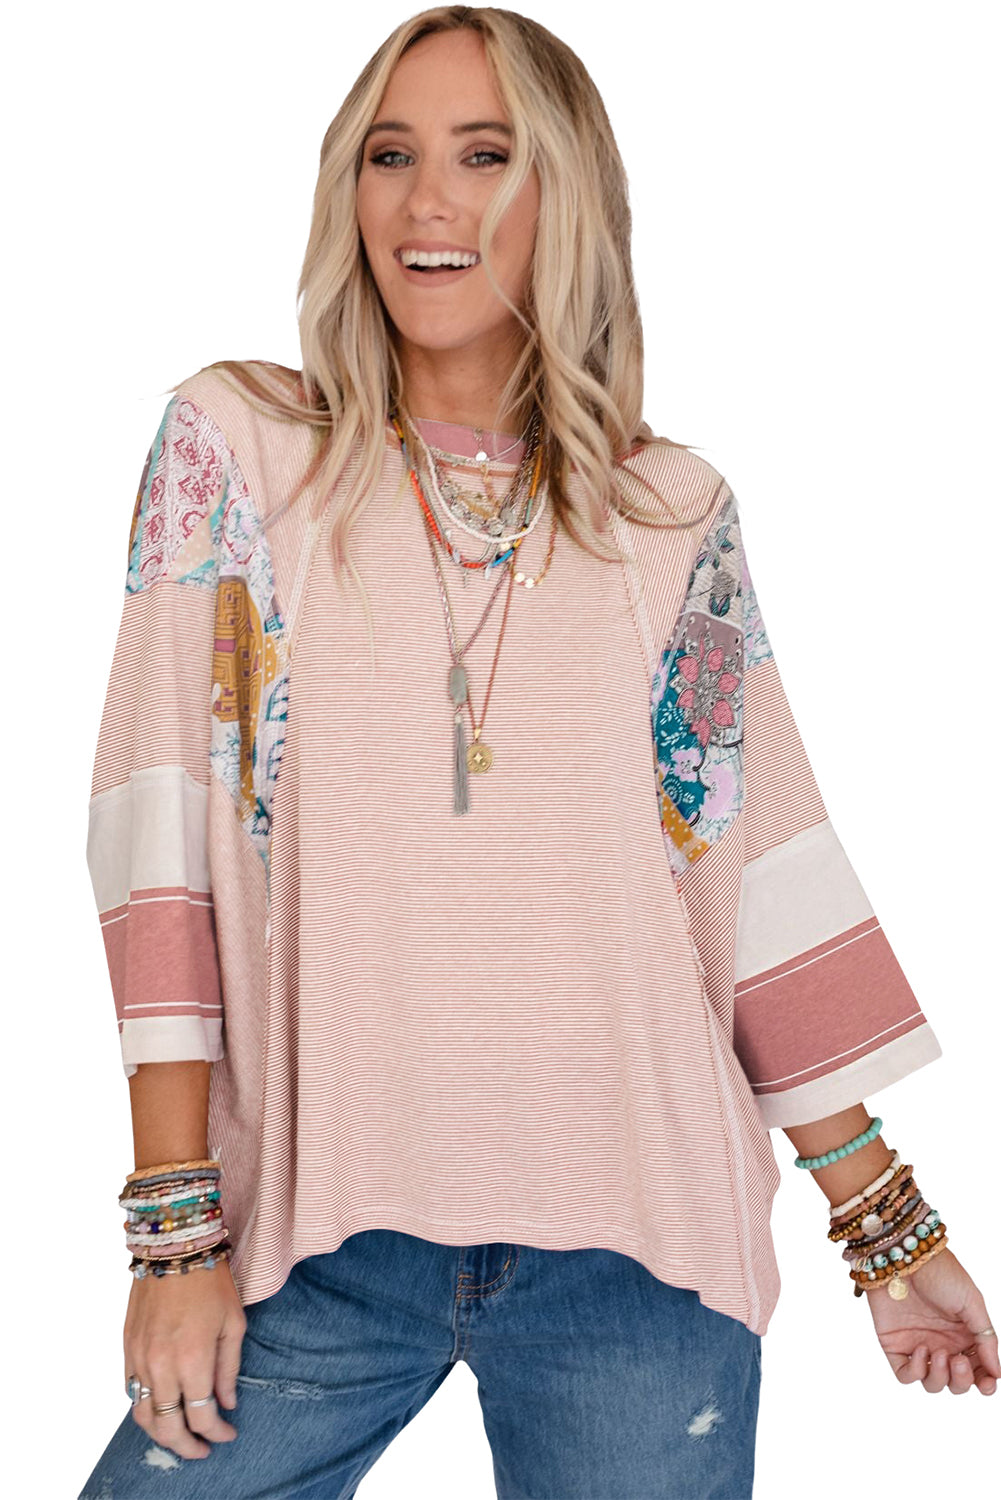 Pink Printed Pinstriped Color Block Patchwork Oversized Top